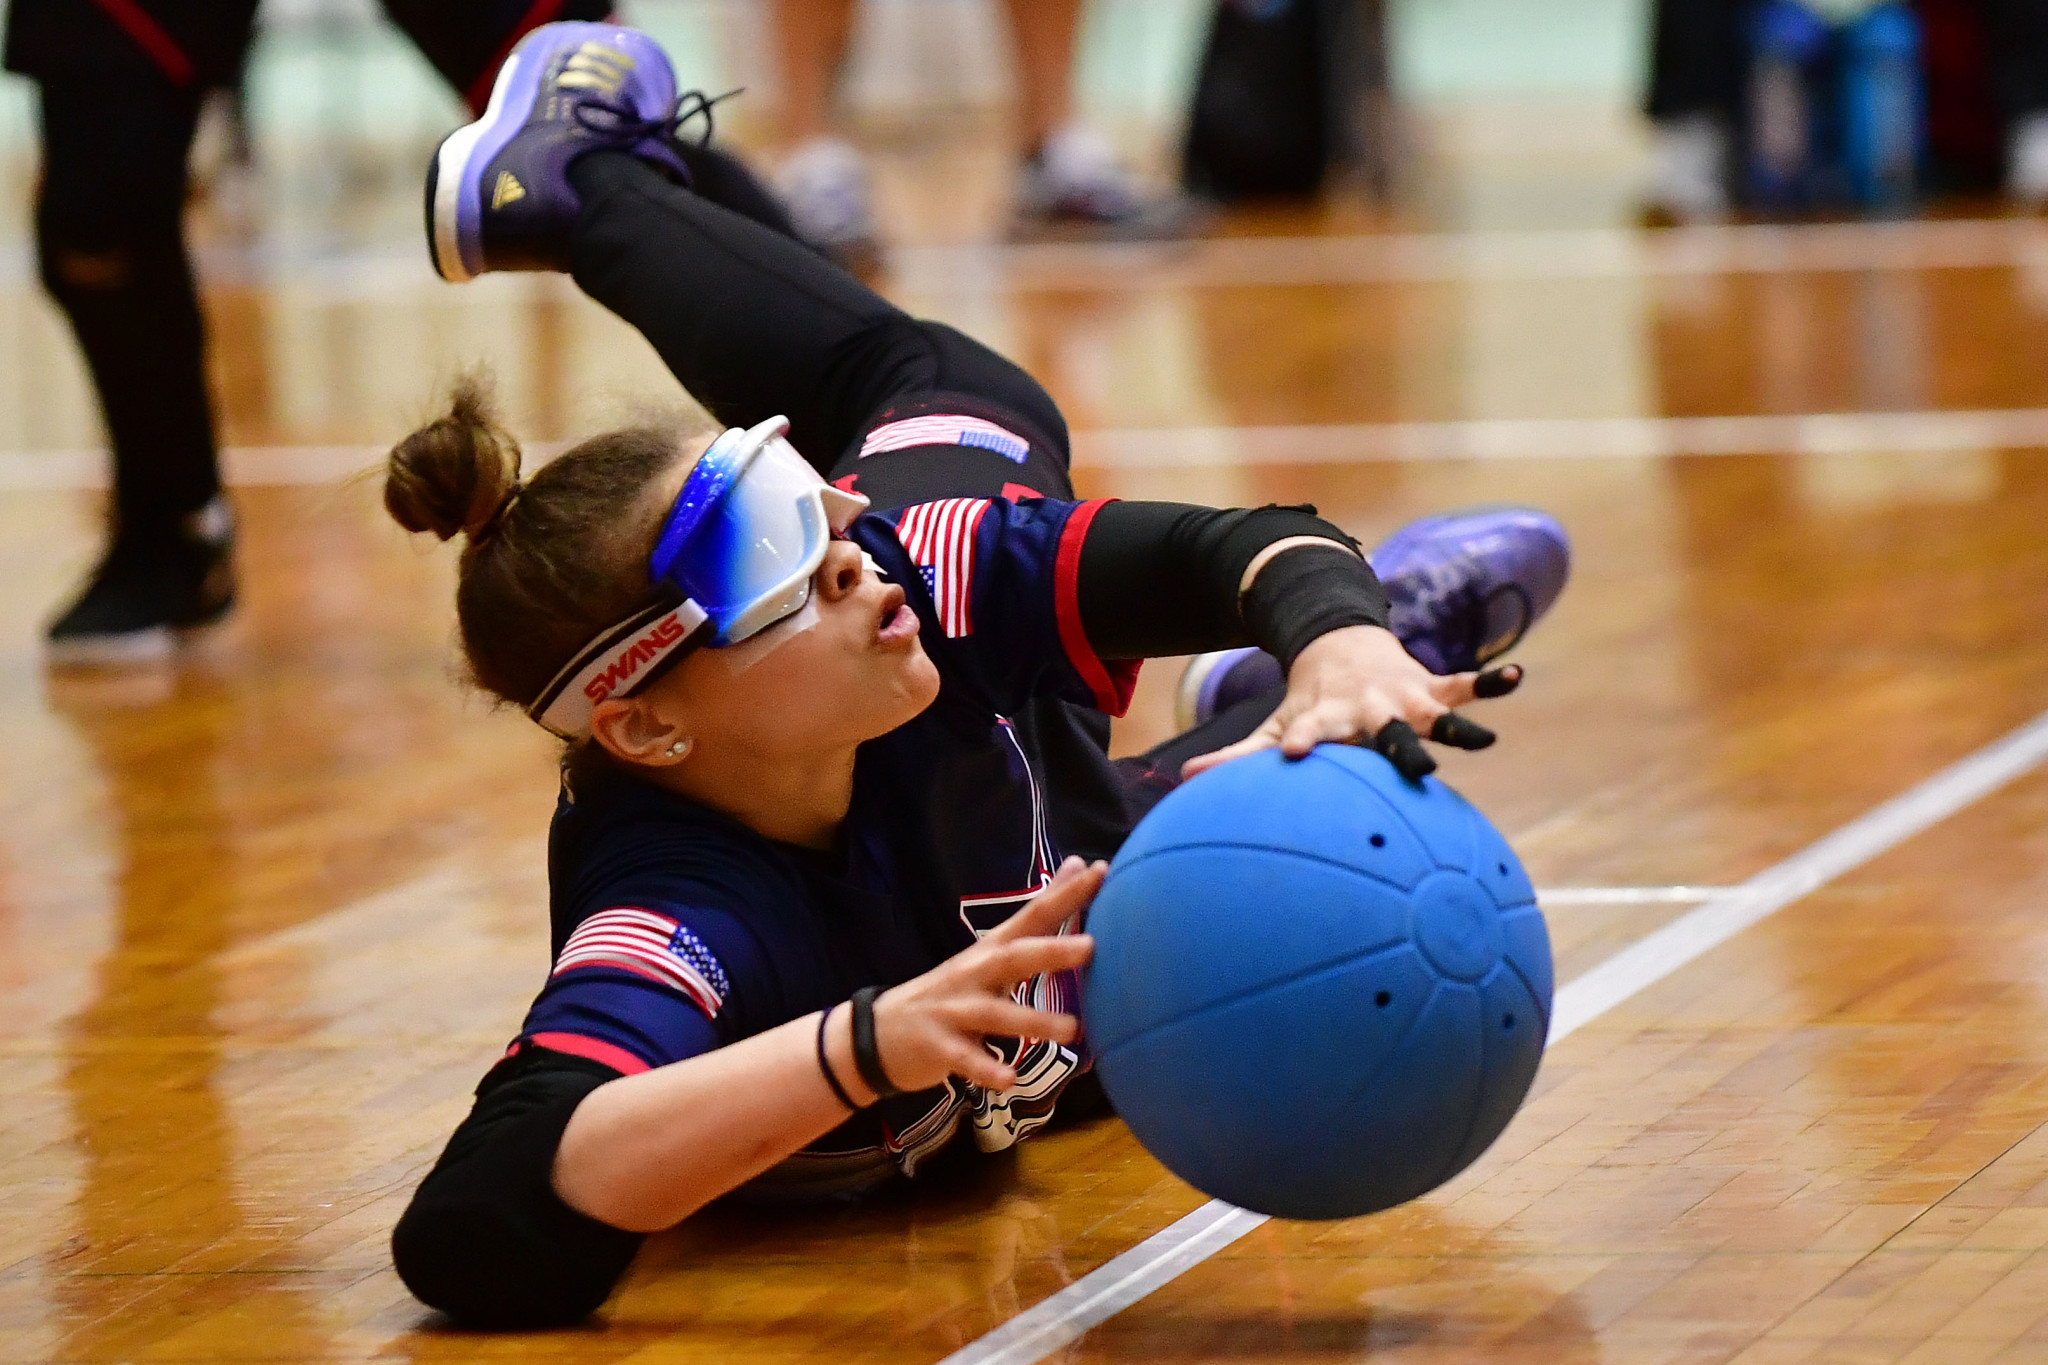 America's Amanda Dennis will be hoping for a turnaround in fortunes at the Goalball International Qualifier in Fort Wayne as the team try to qualify for Tokyo 2020 having won the Paralympic Games bronze medals at Rio 2016 ©Getty Images